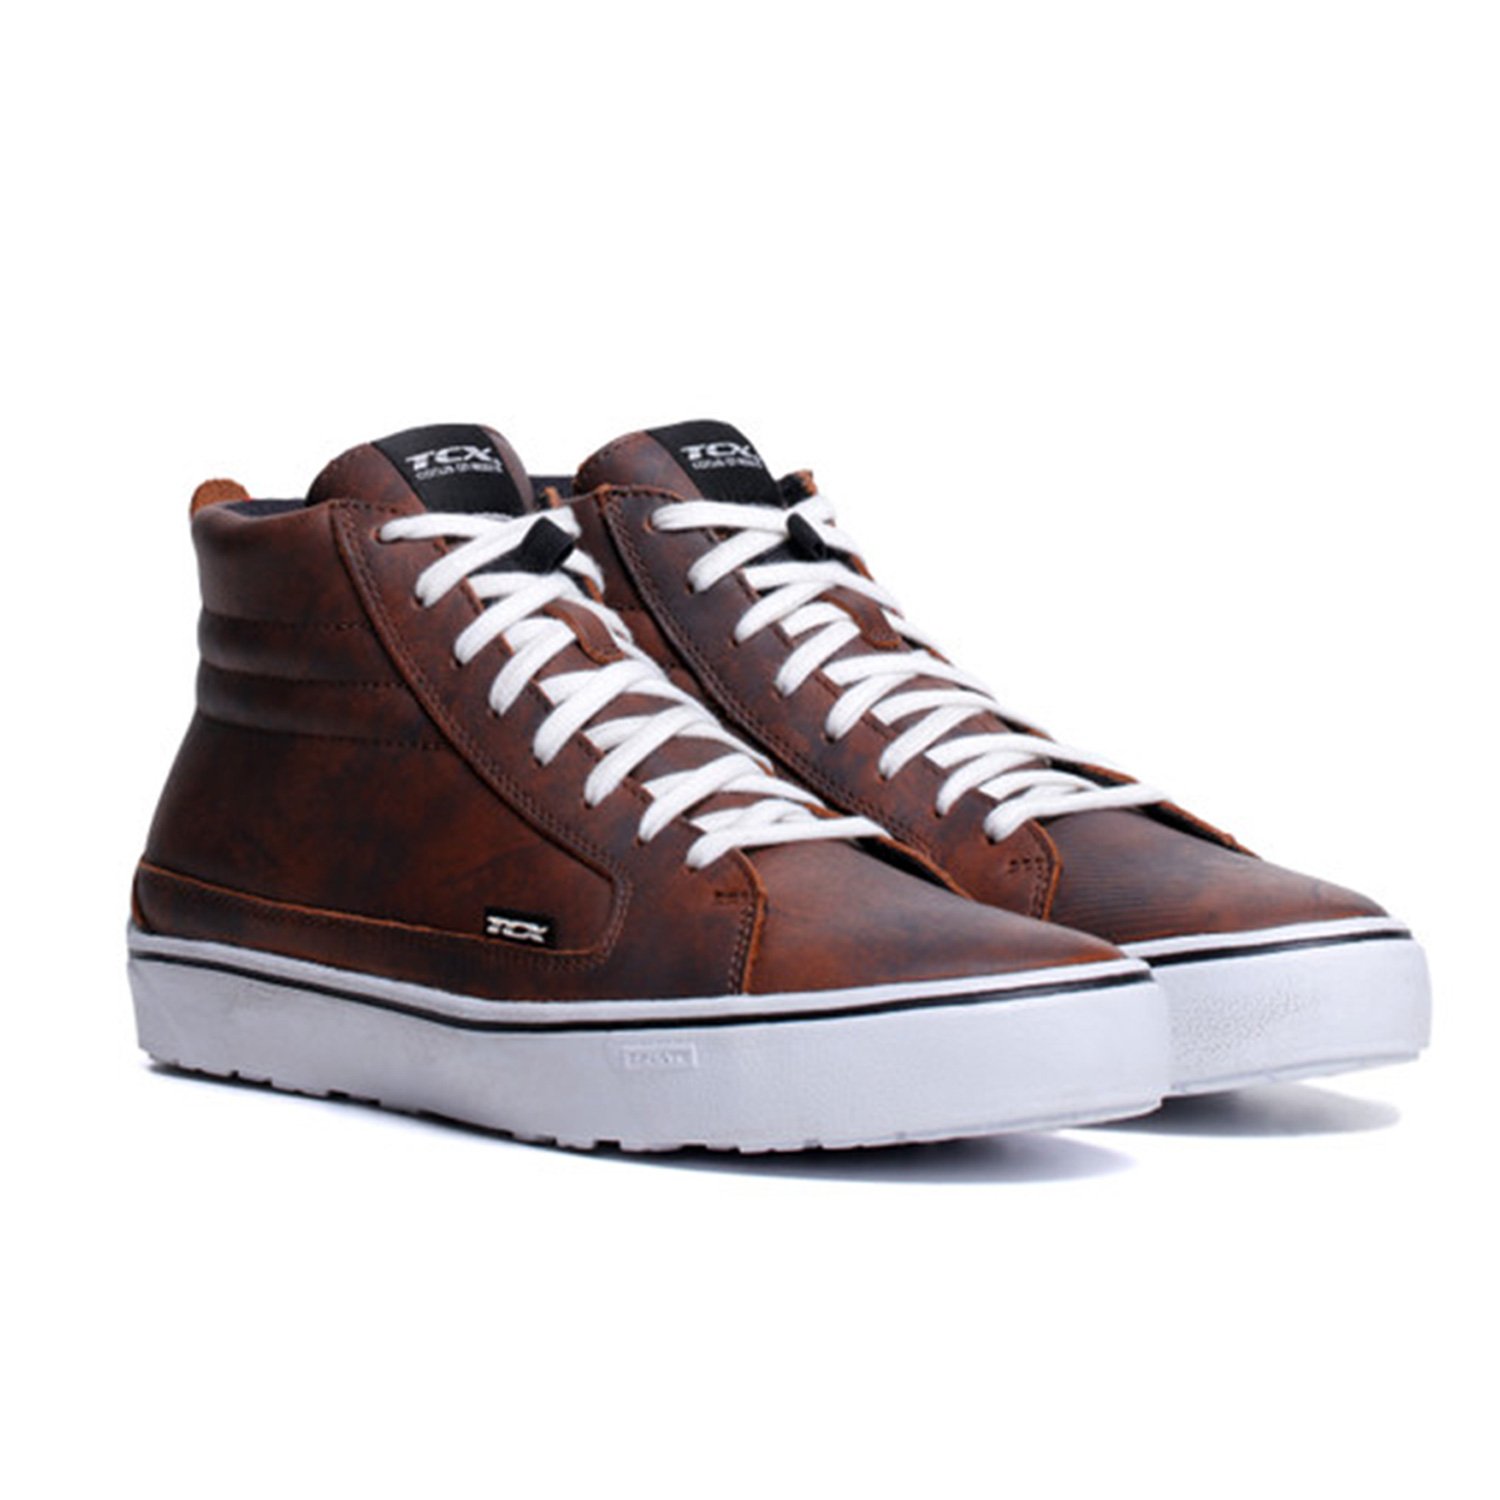 Image of EU TCX Street 3 WP Marron Blanc Chaussures Taille 44